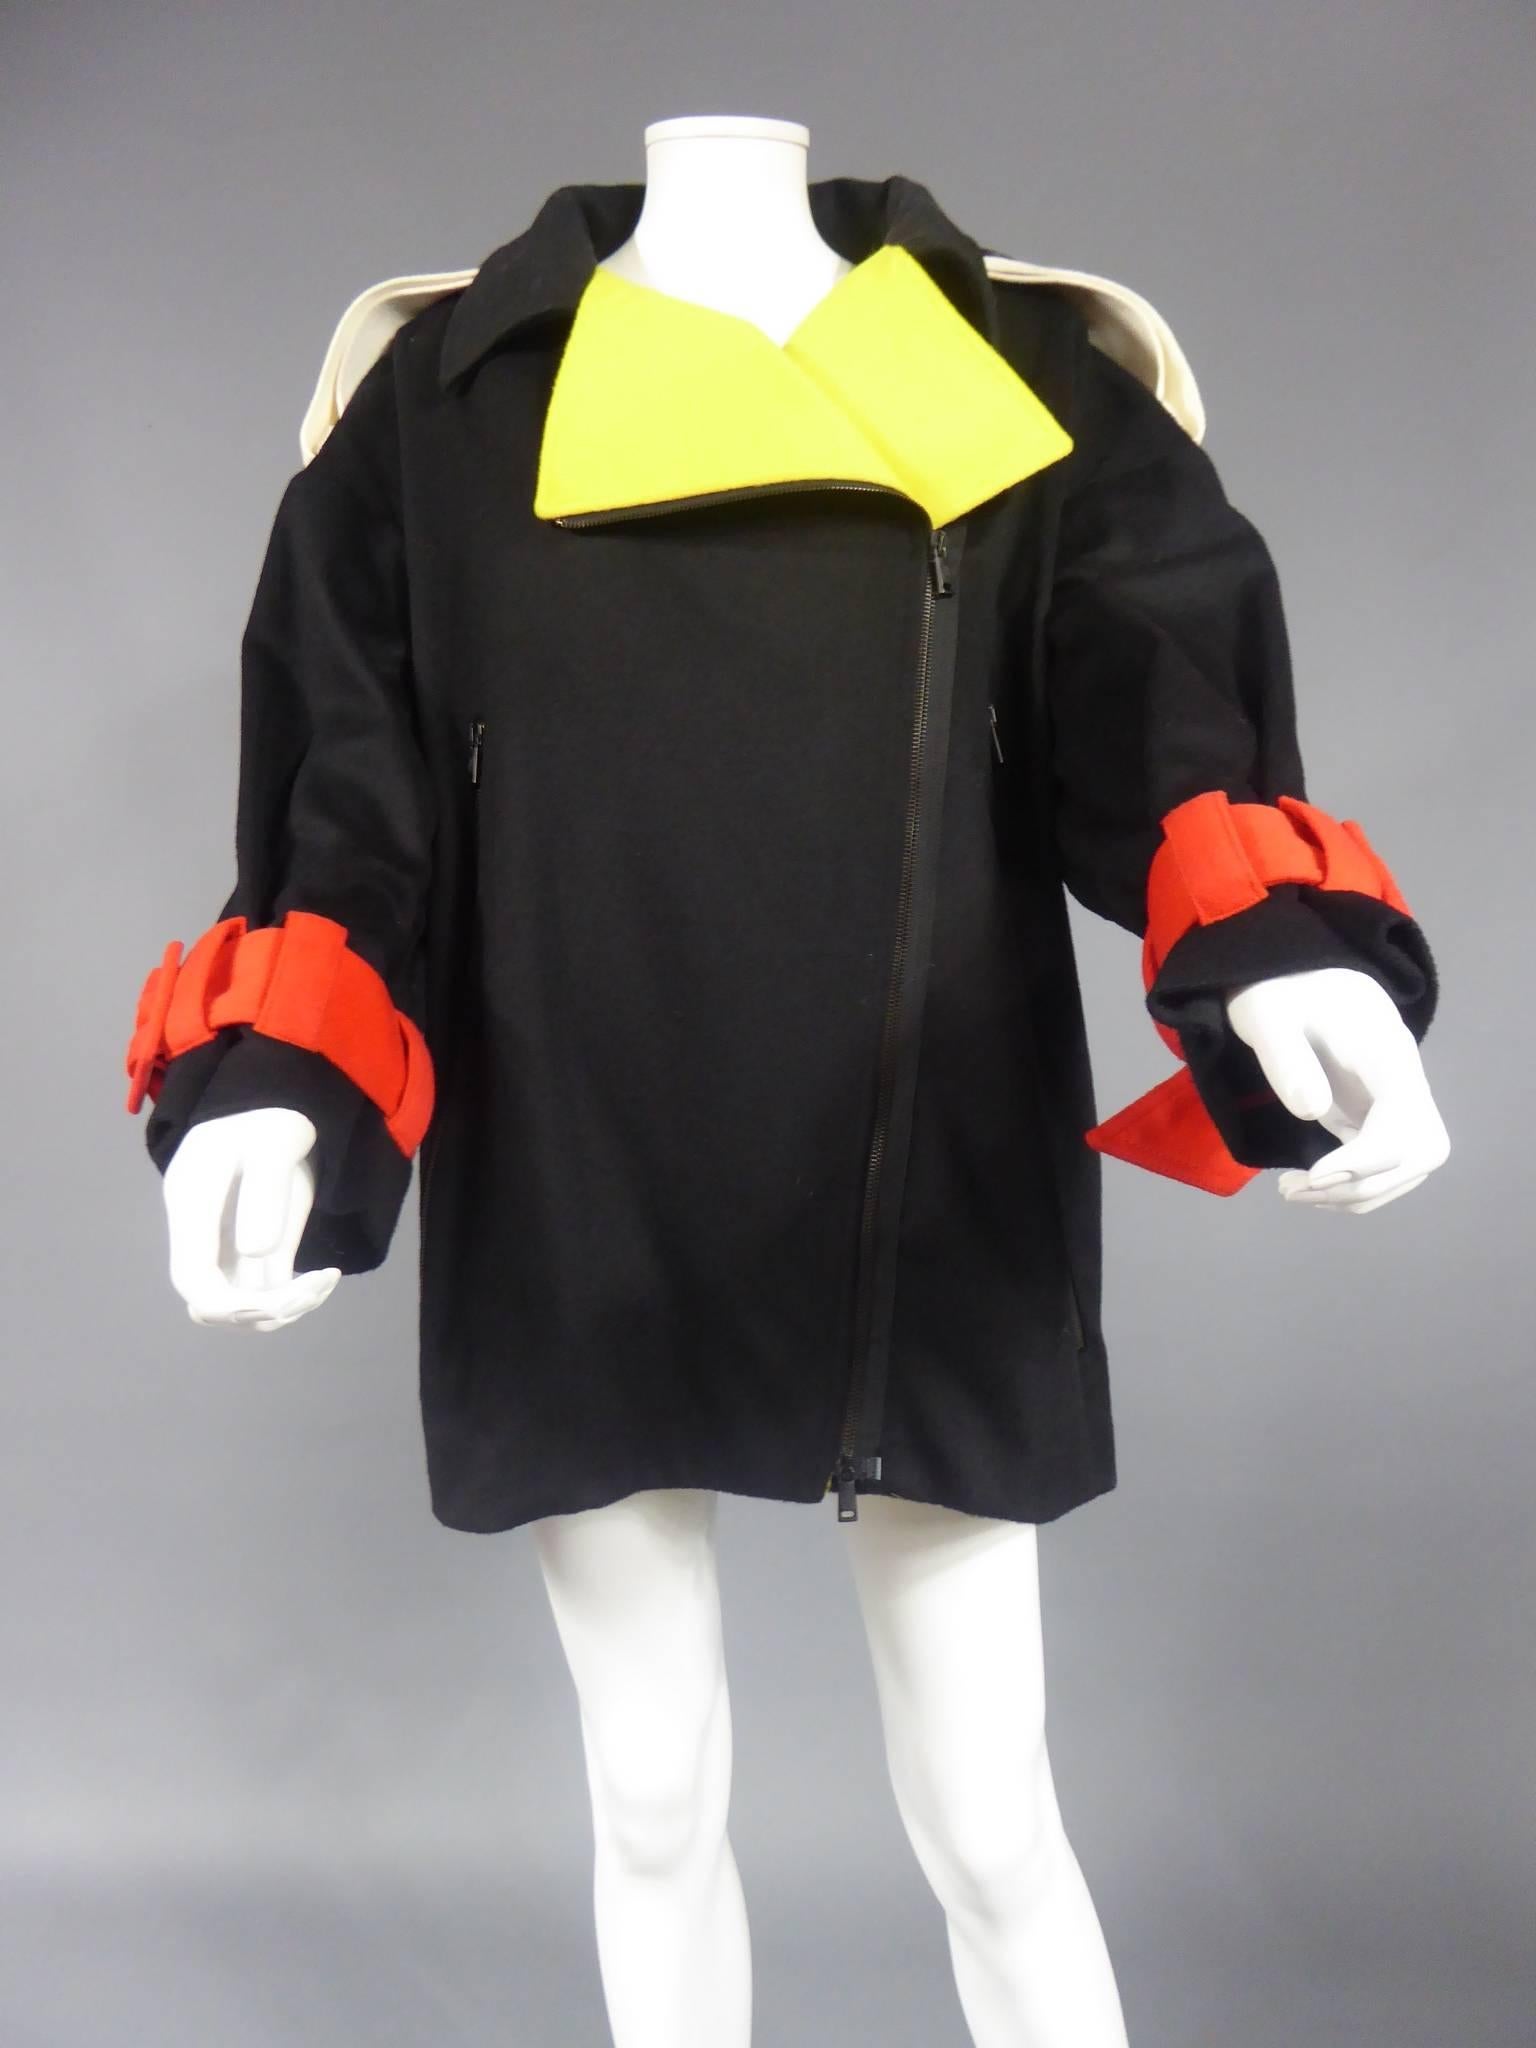 Circa 1980/1990

France

Beautiful coat from the Disney collection that is emblematic of the ready-to-wear collections of the playful couturier, Jean-Charles de Castelbajac. Thick black wool felt featuring over-sized codes from the Walt Disney